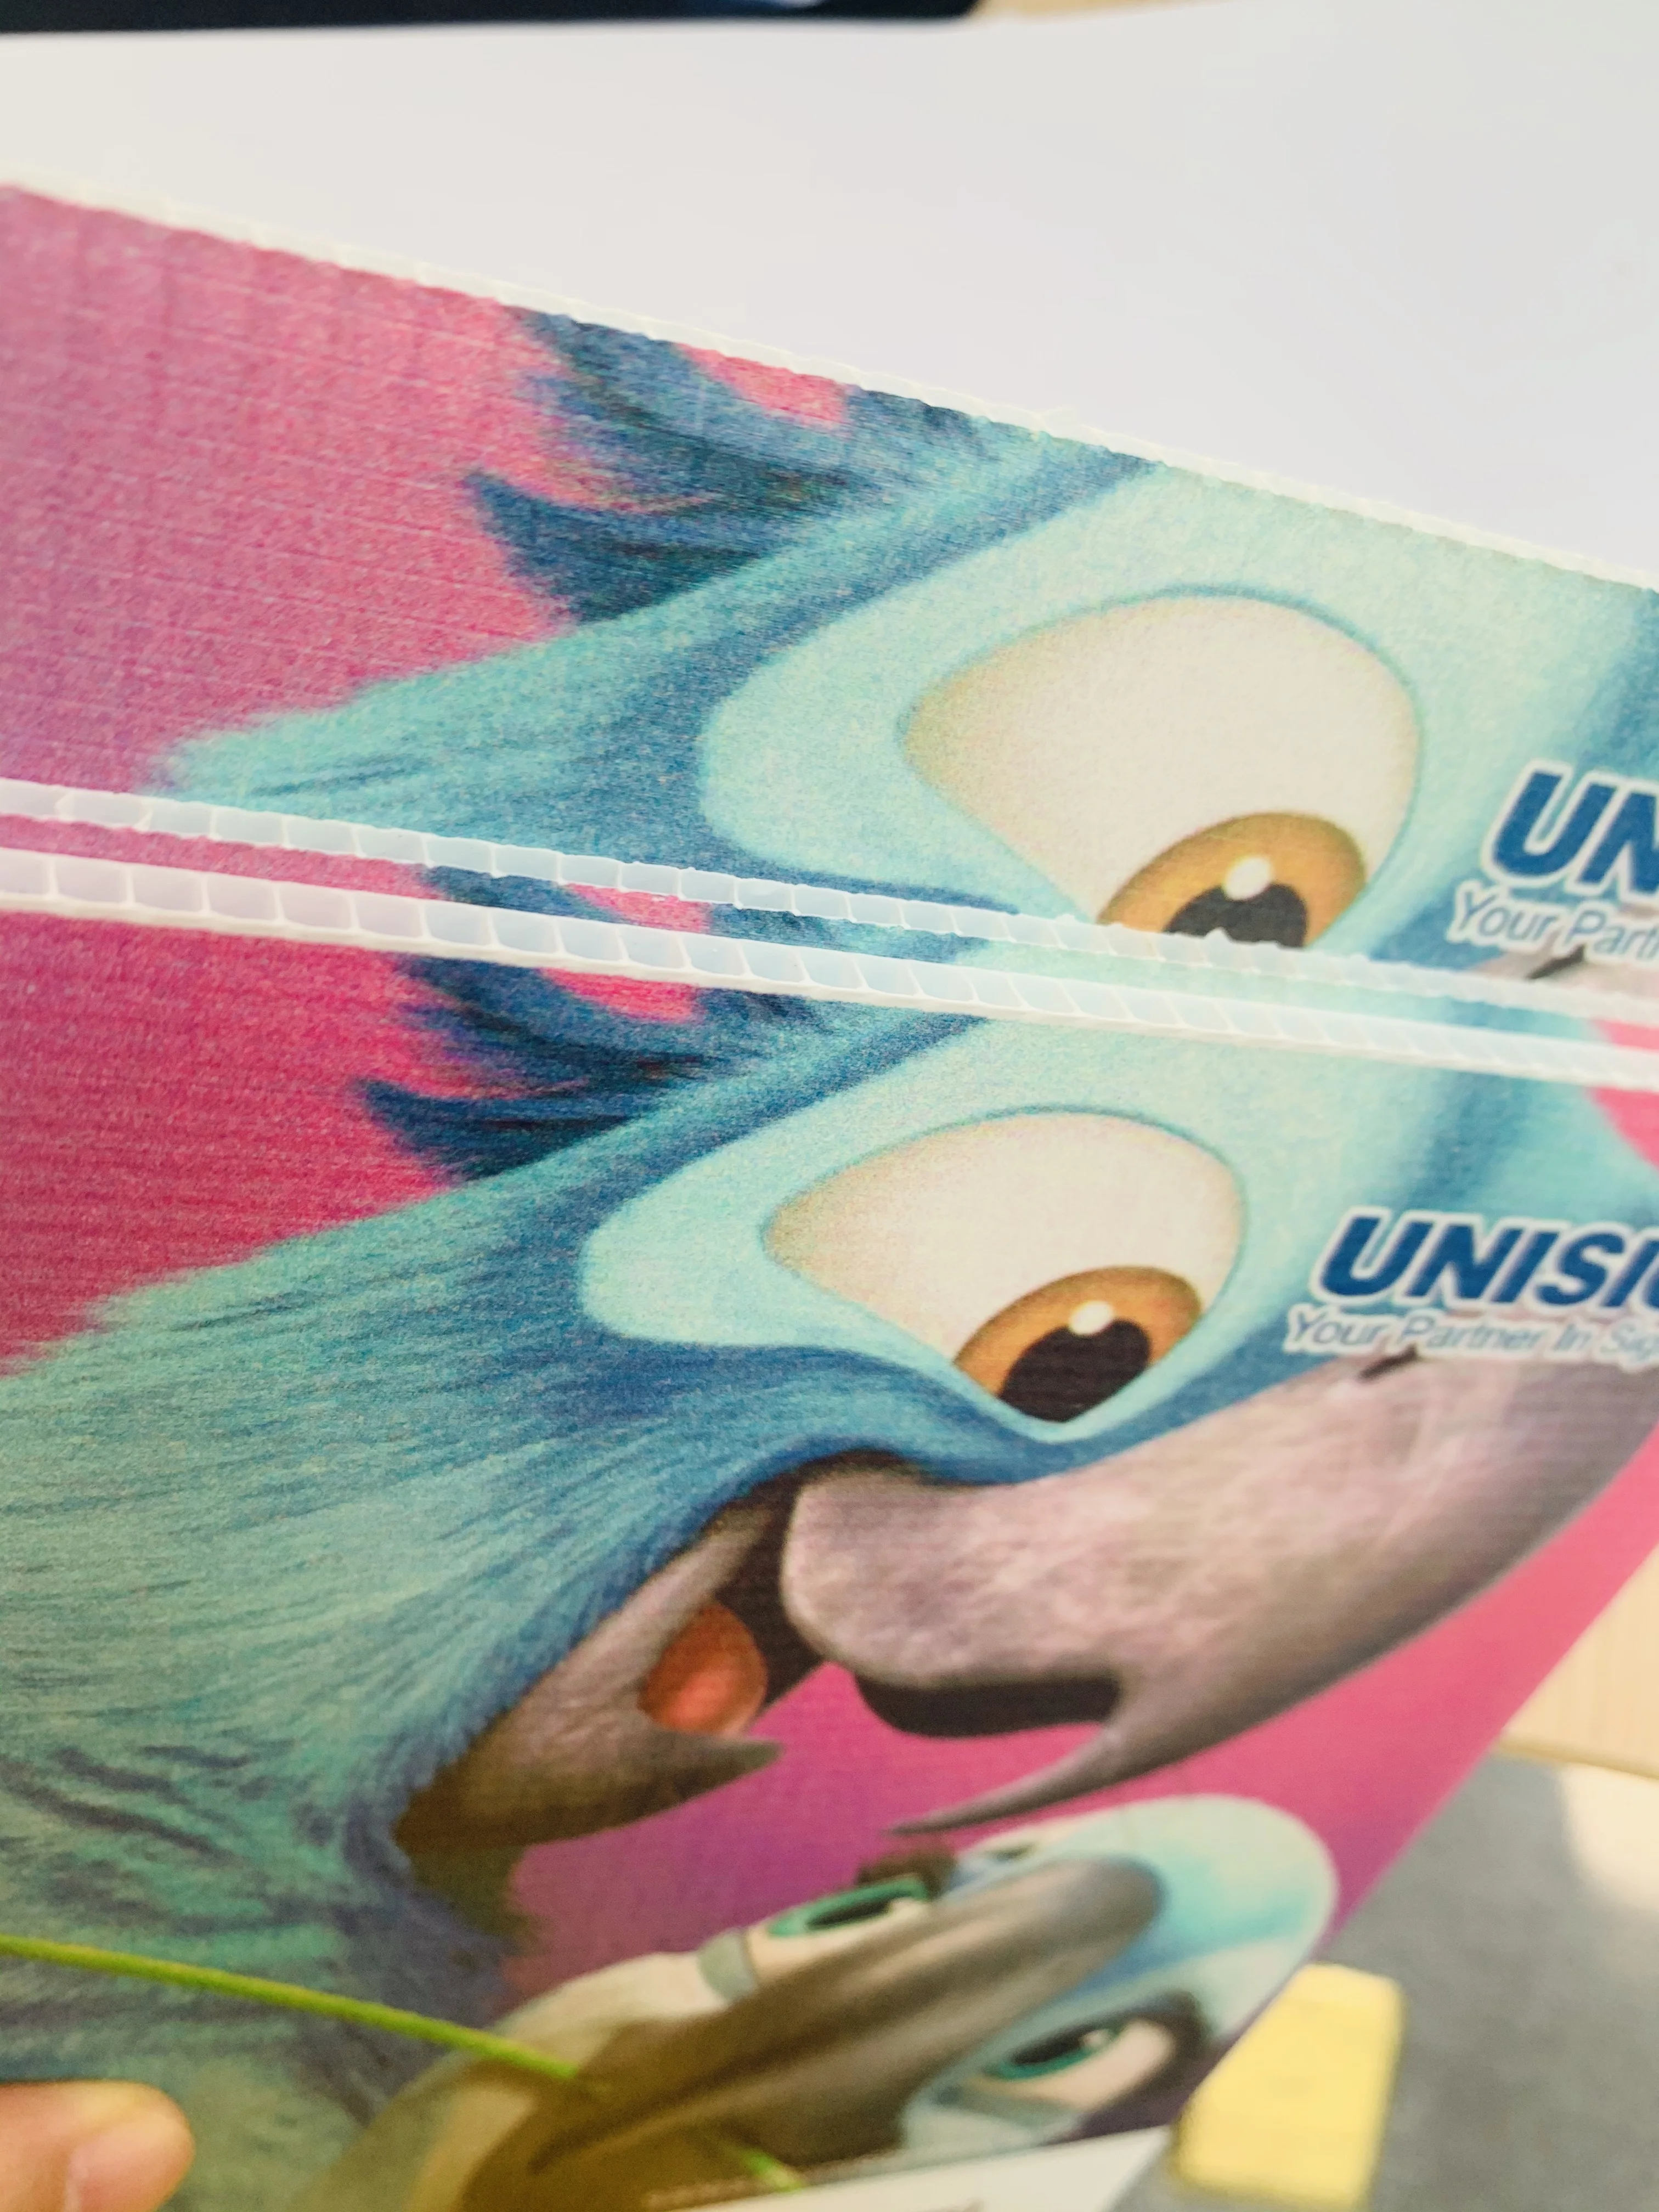 
Unisign pp hollow sheet Carton Plastic for advertisement display, surface protection, logistics packaging 